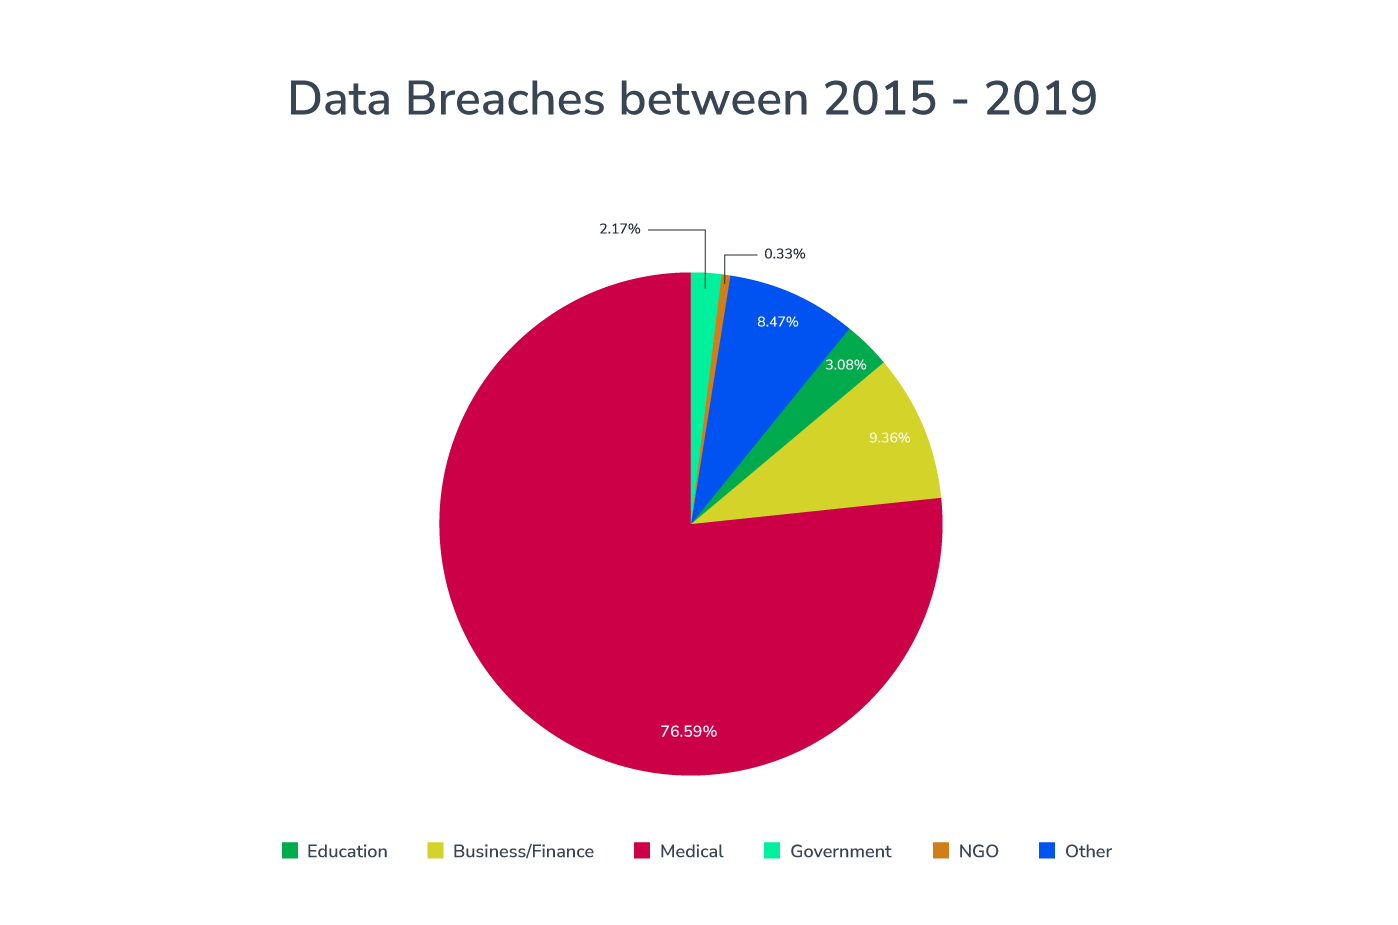 Image of data breaches between 2015 and 2019 showing the lack of security